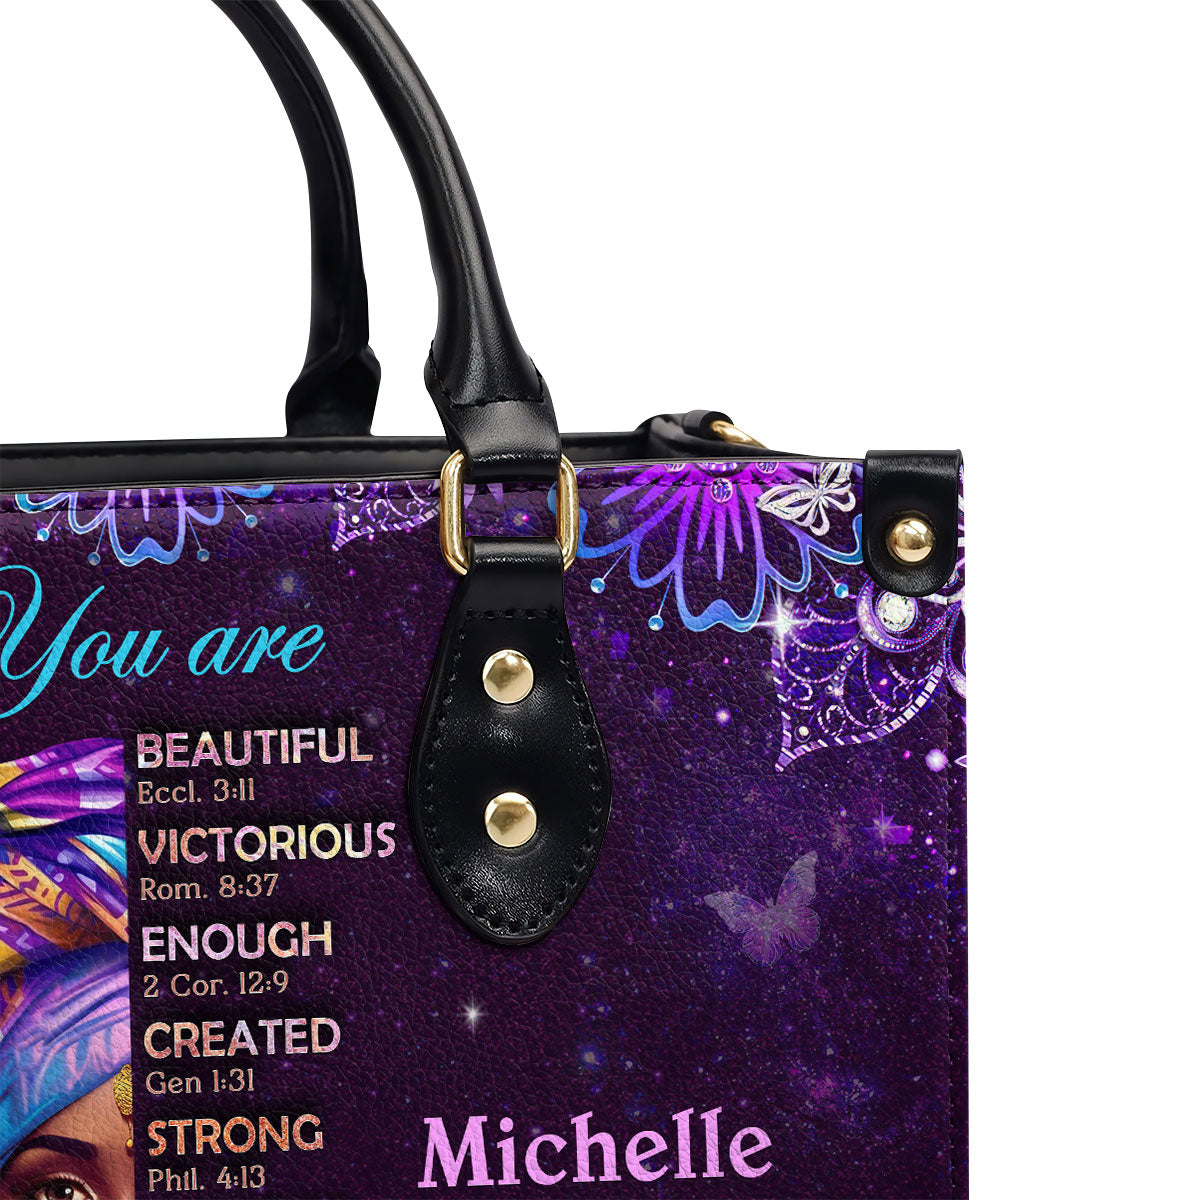 God Says You Are - Personalized Leather Handbag MB32